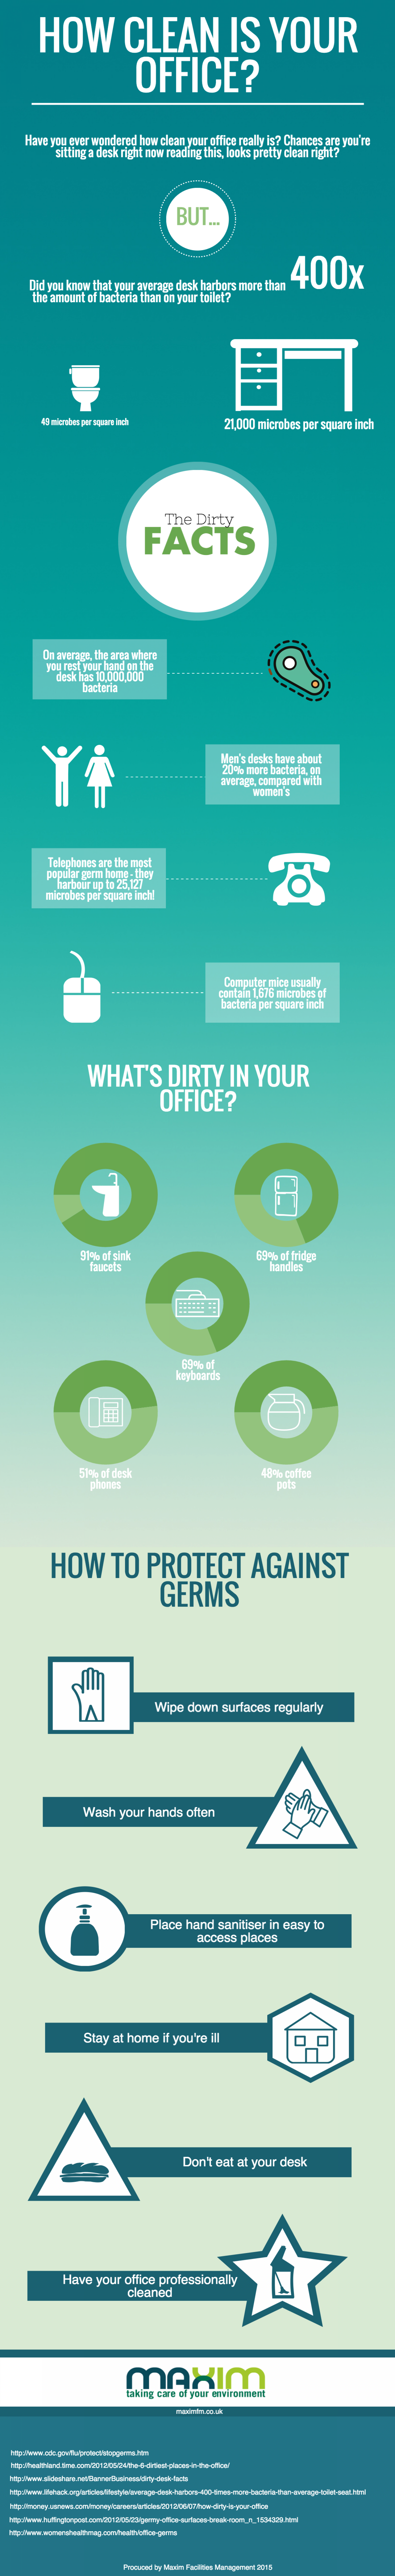 How Clean is Your Office? Infographic